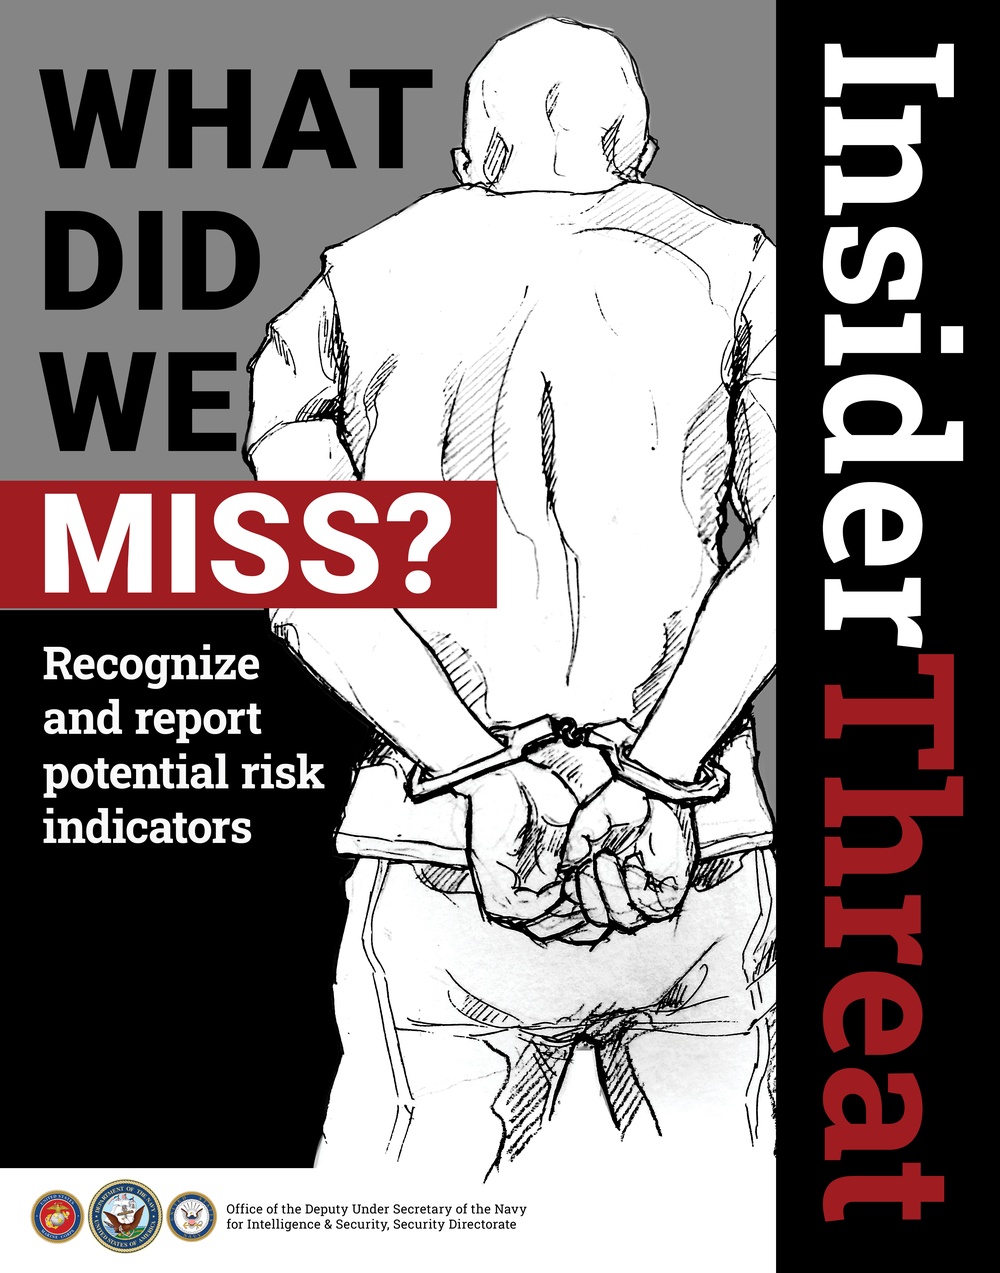 Insider Threat Poster_What did we miss?